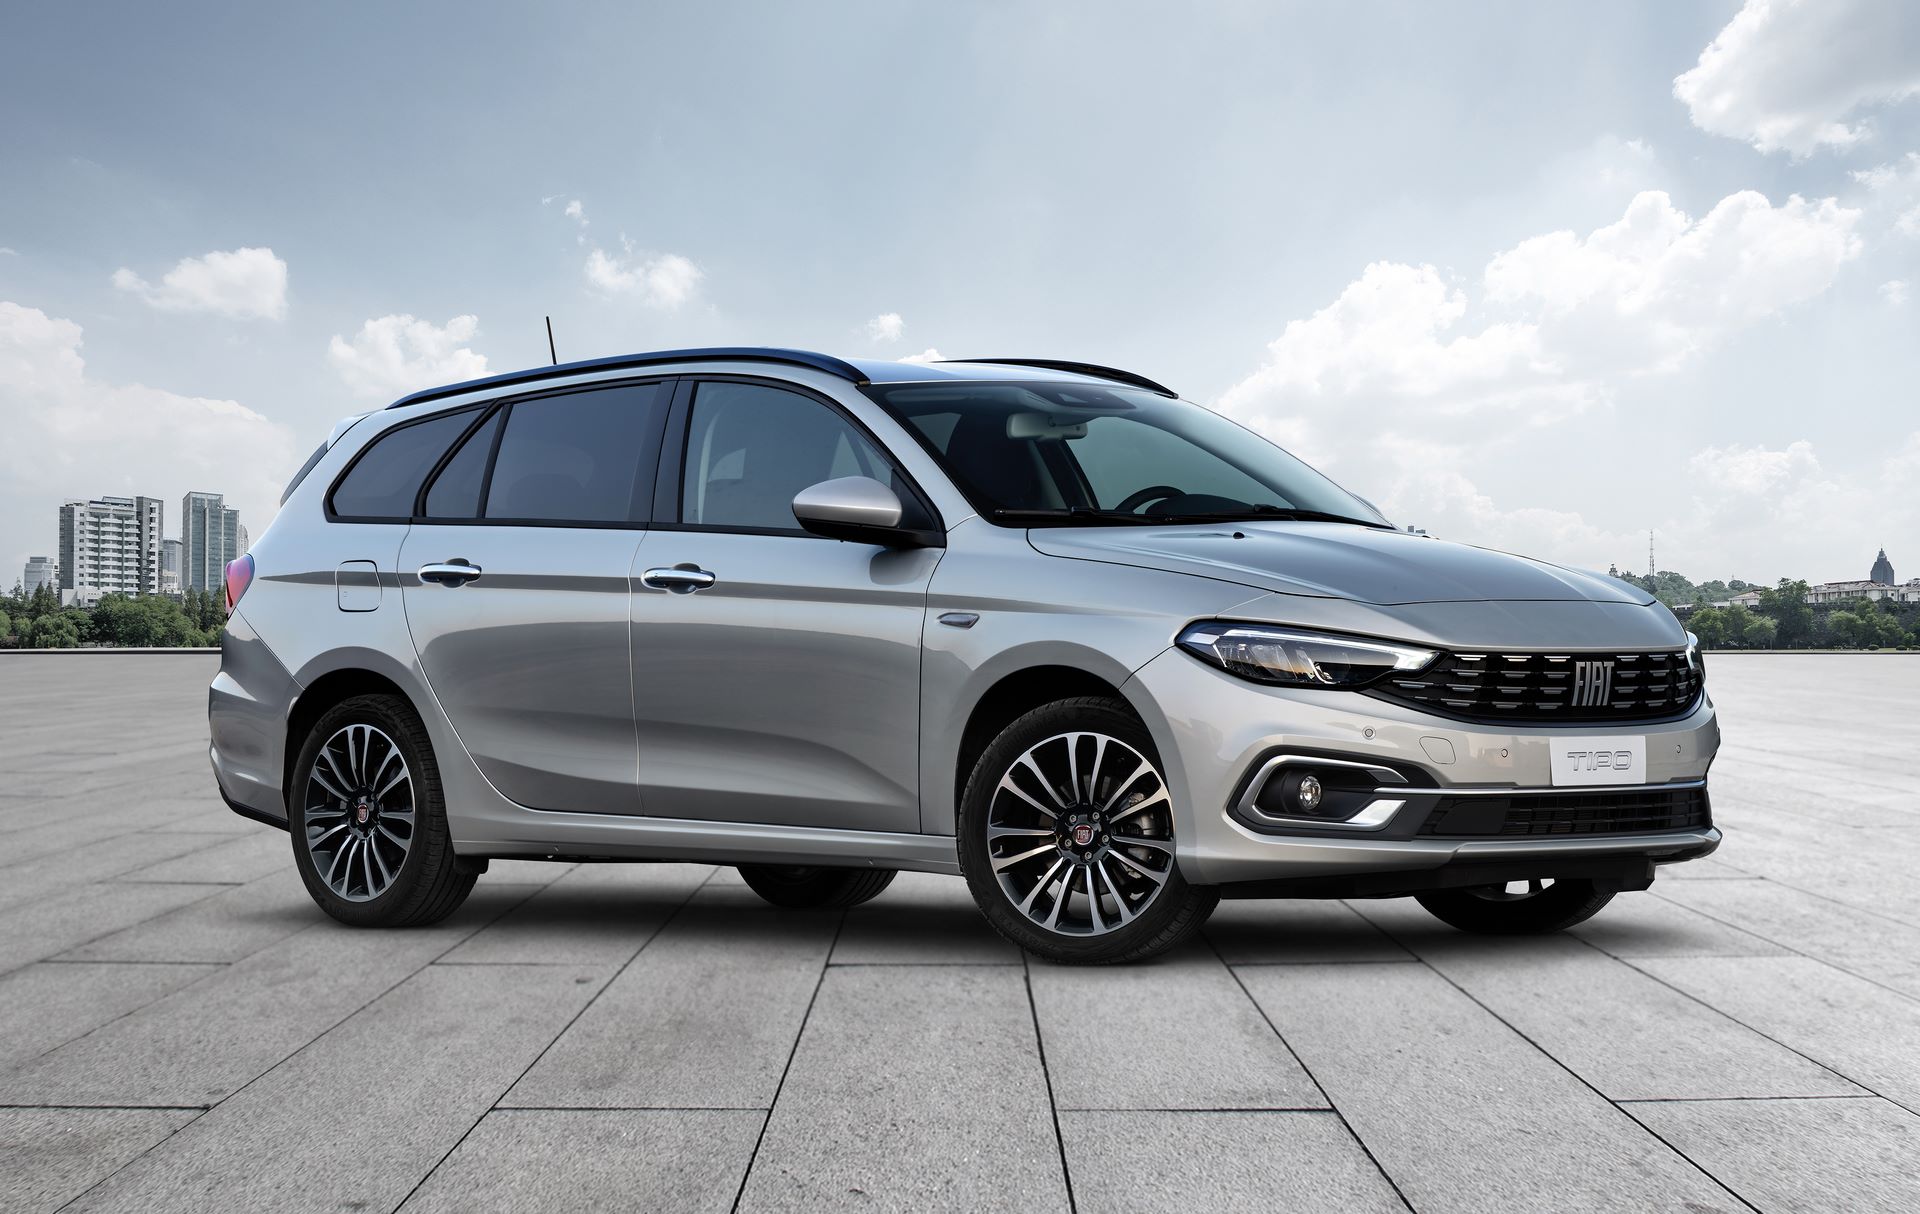 Fiat Tipo SW (2021): lifting